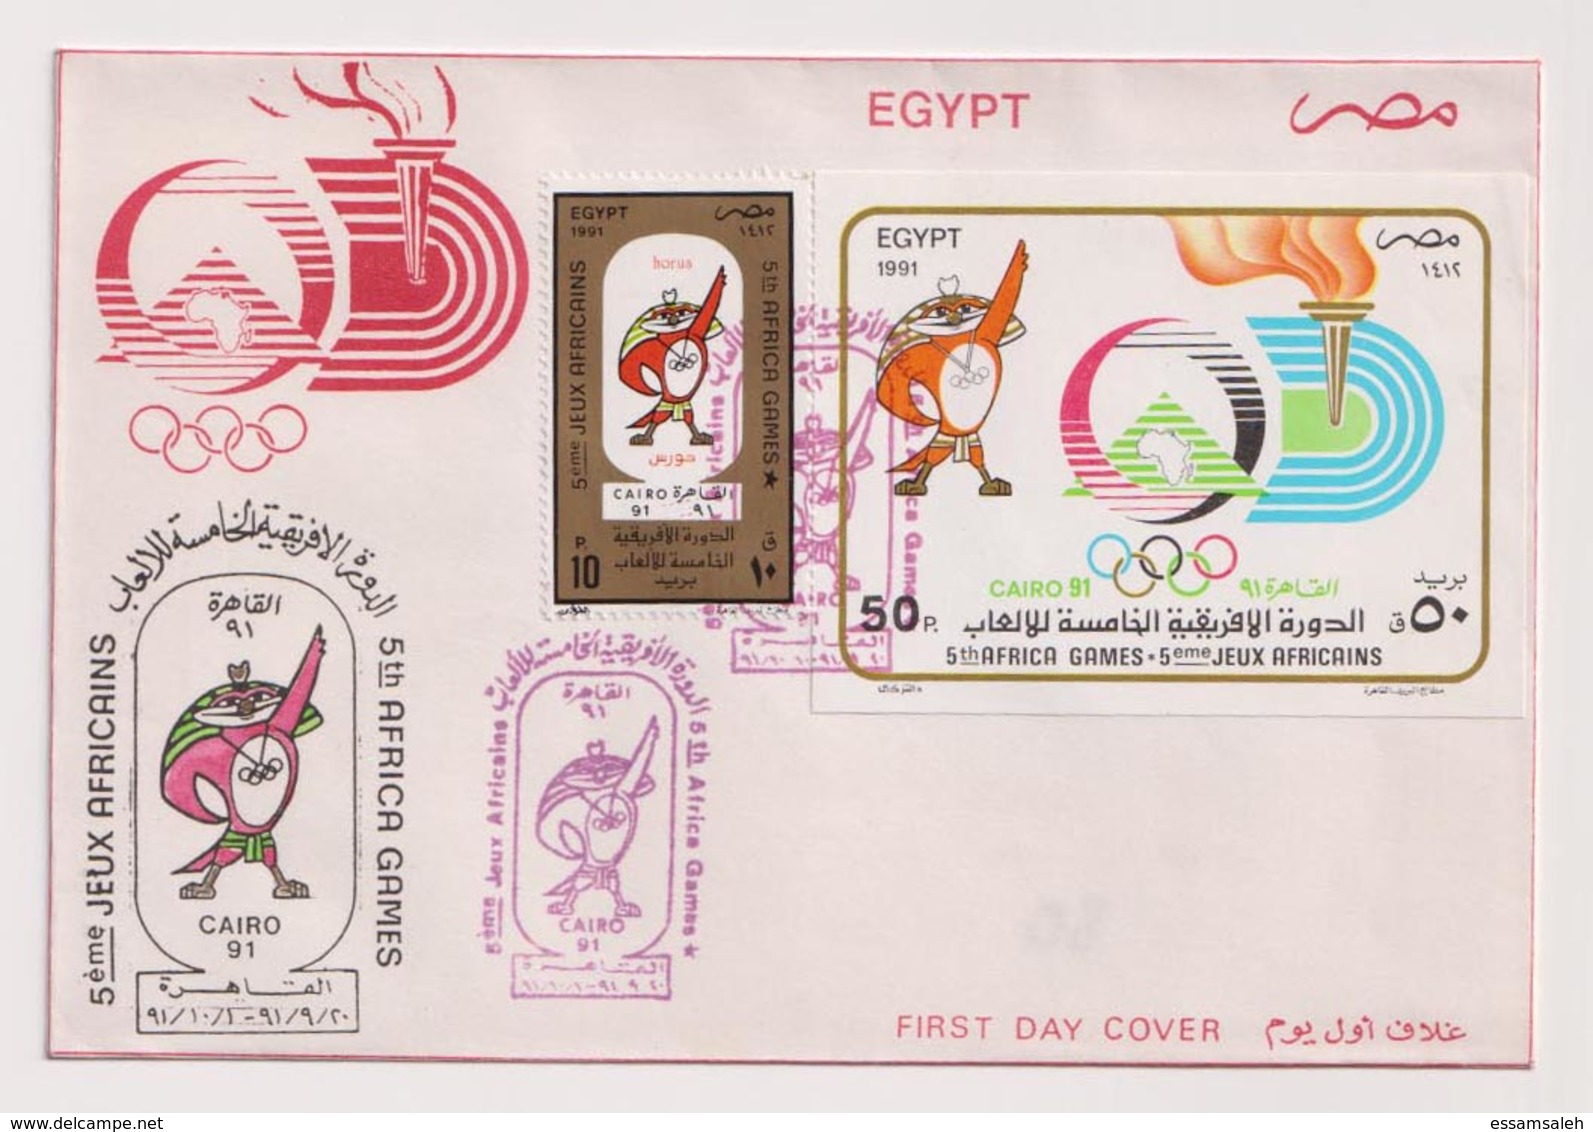 EGS30753 Egypt 1991 5th AFRICAN GAMES IN CAIRO / Rare Ismailia CDS / FDC & Cairo CDS - Covers & Documents